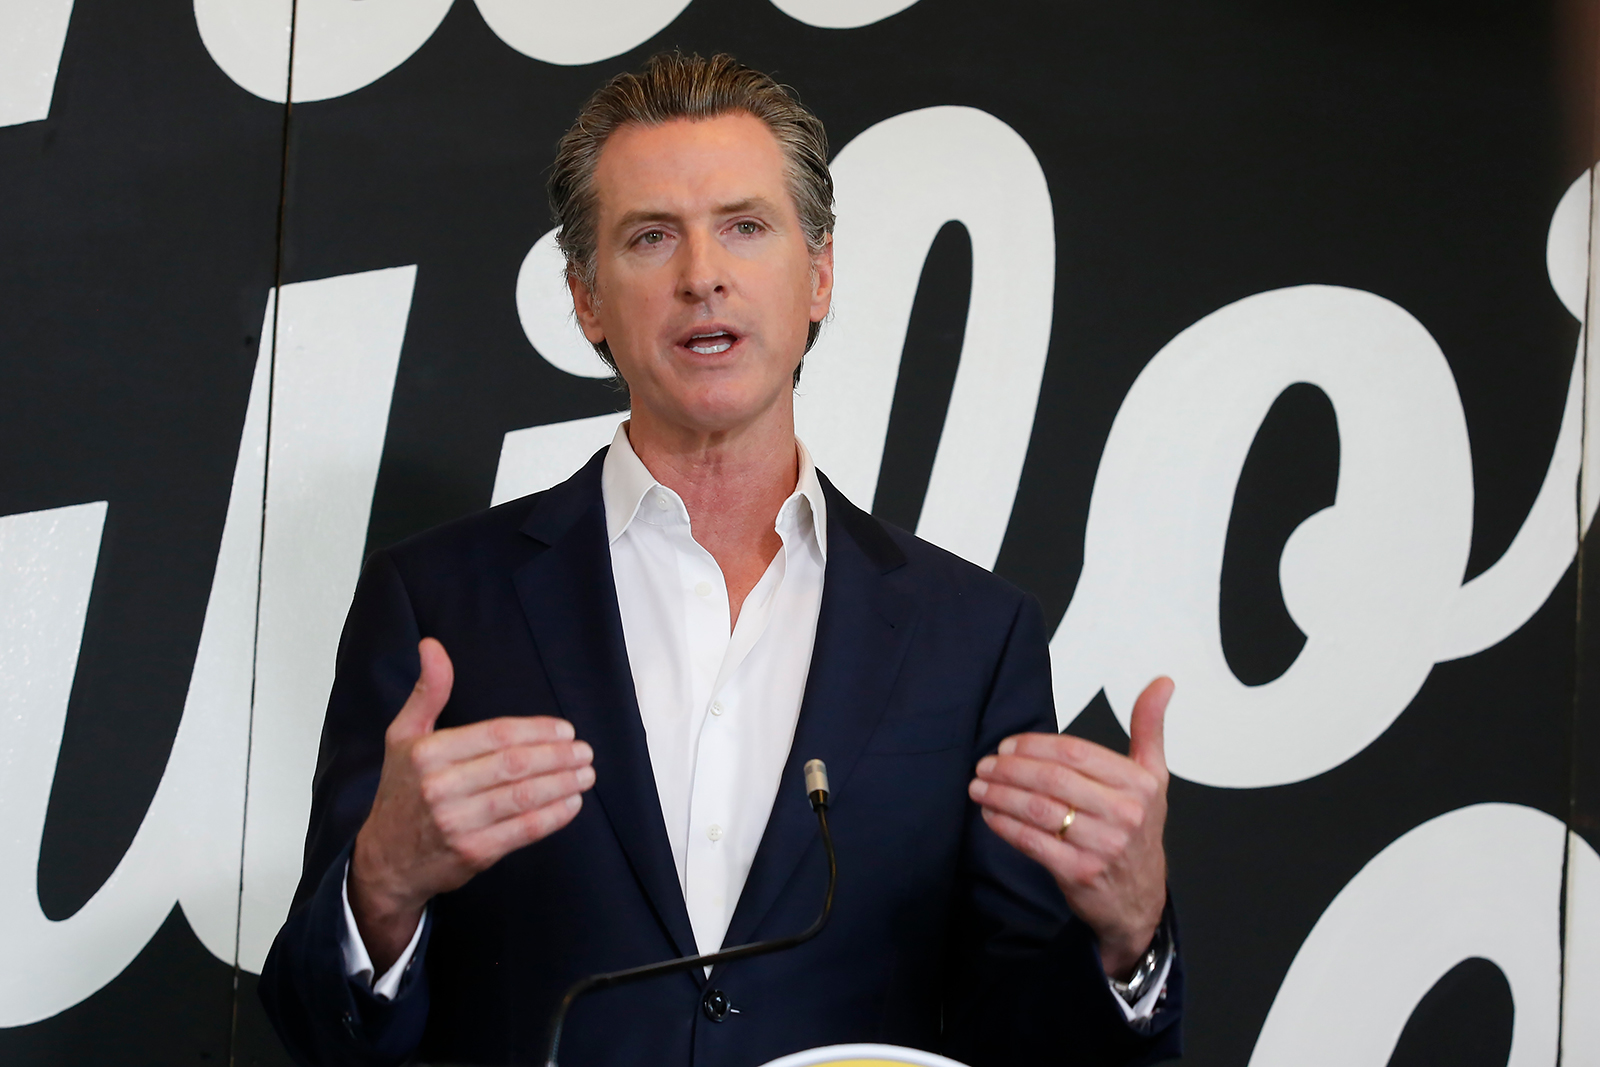 Gov. Gavin Newsom discusses his plan for the gradual reopening of California businesses during a news conference at the Display California store in Sacramento, California on Tuesday, May 5.